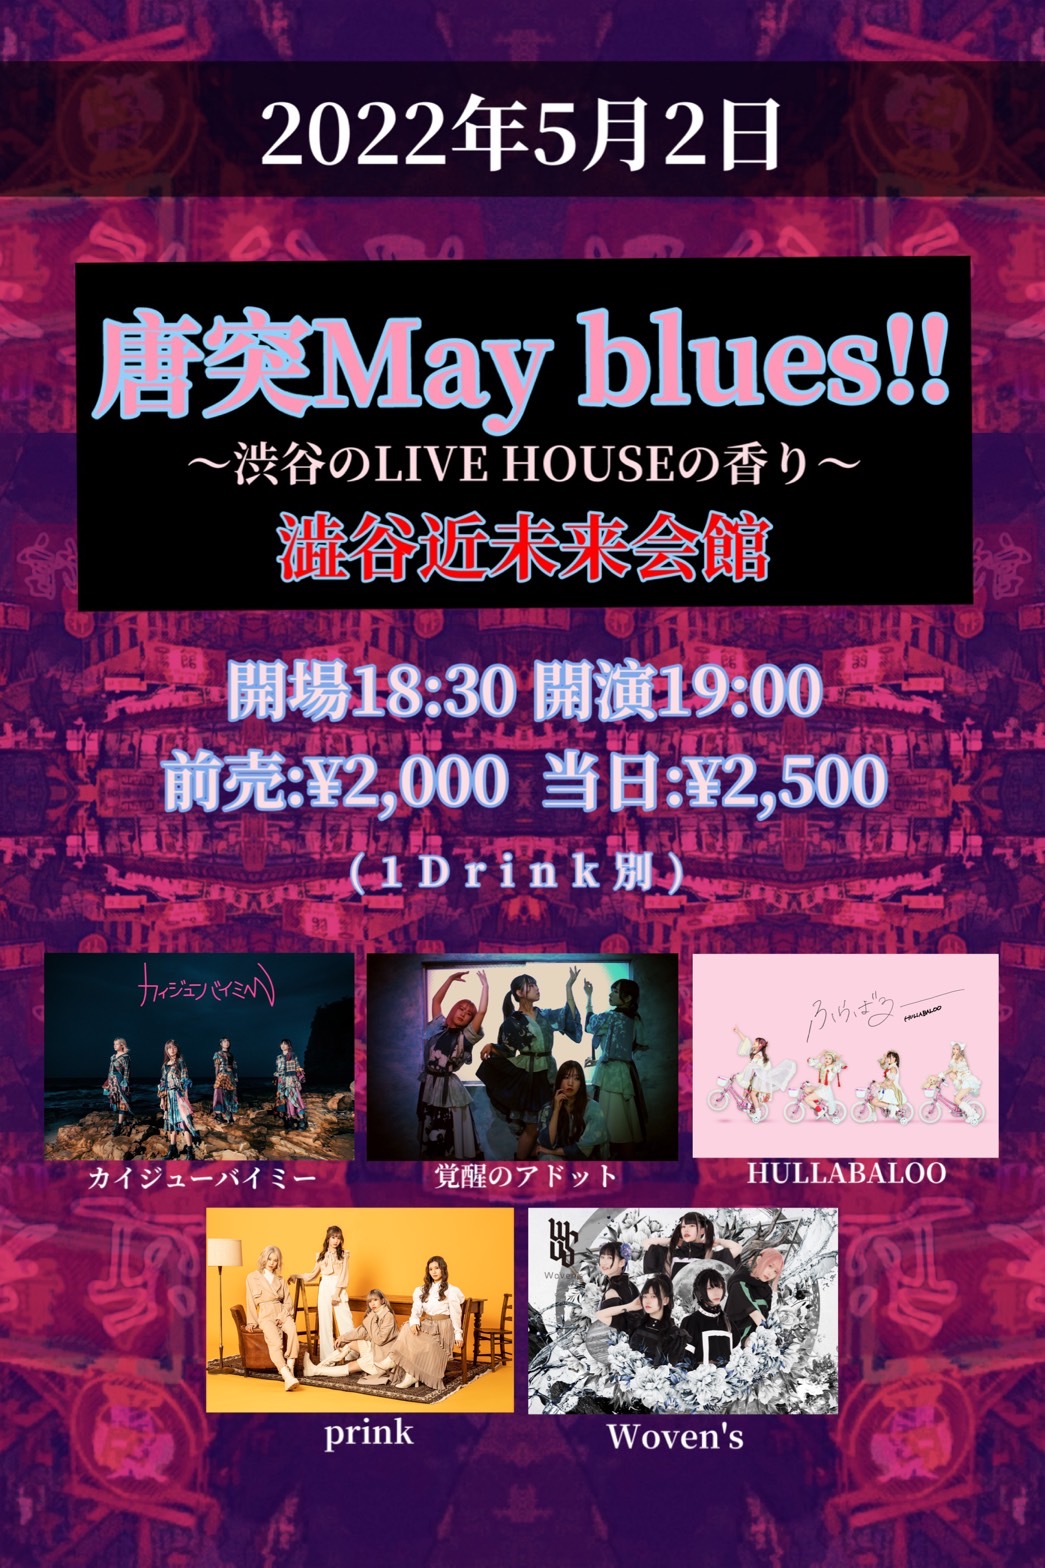 I LOVE YOU ENTERTAINMENT MUSIC主催LIVE「唐突May blues!!～渋谷のLIVE HOUSEの香り～」